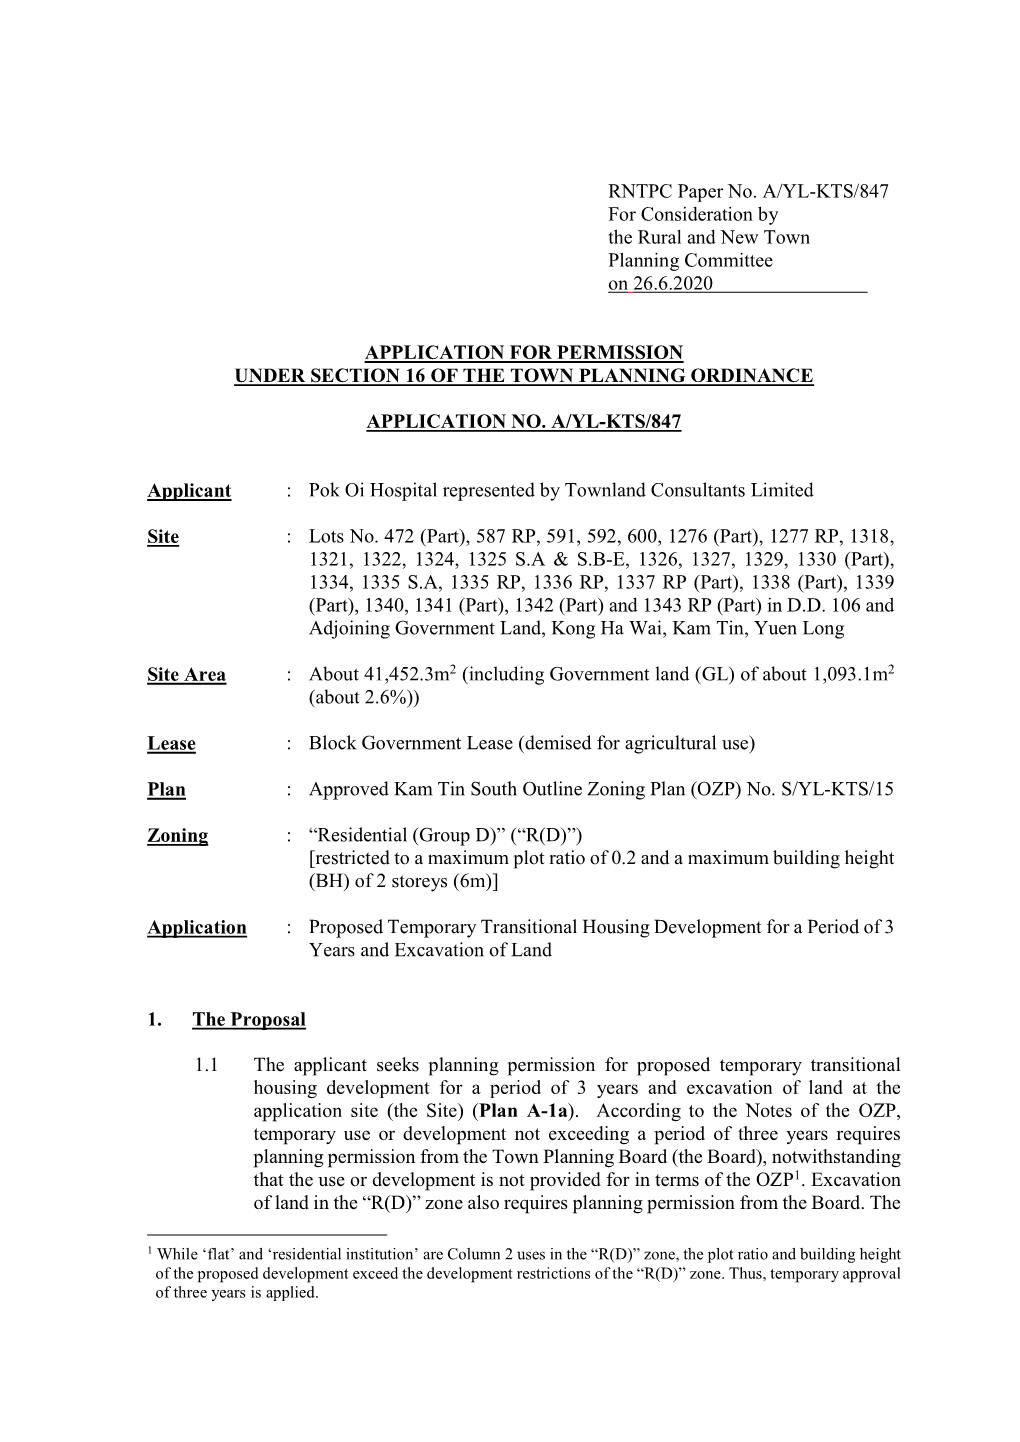 RNTPC Paper No. A/YL-KTS/847 for Consideration by the Rural and New Town Planning Committee on 26.6.2020